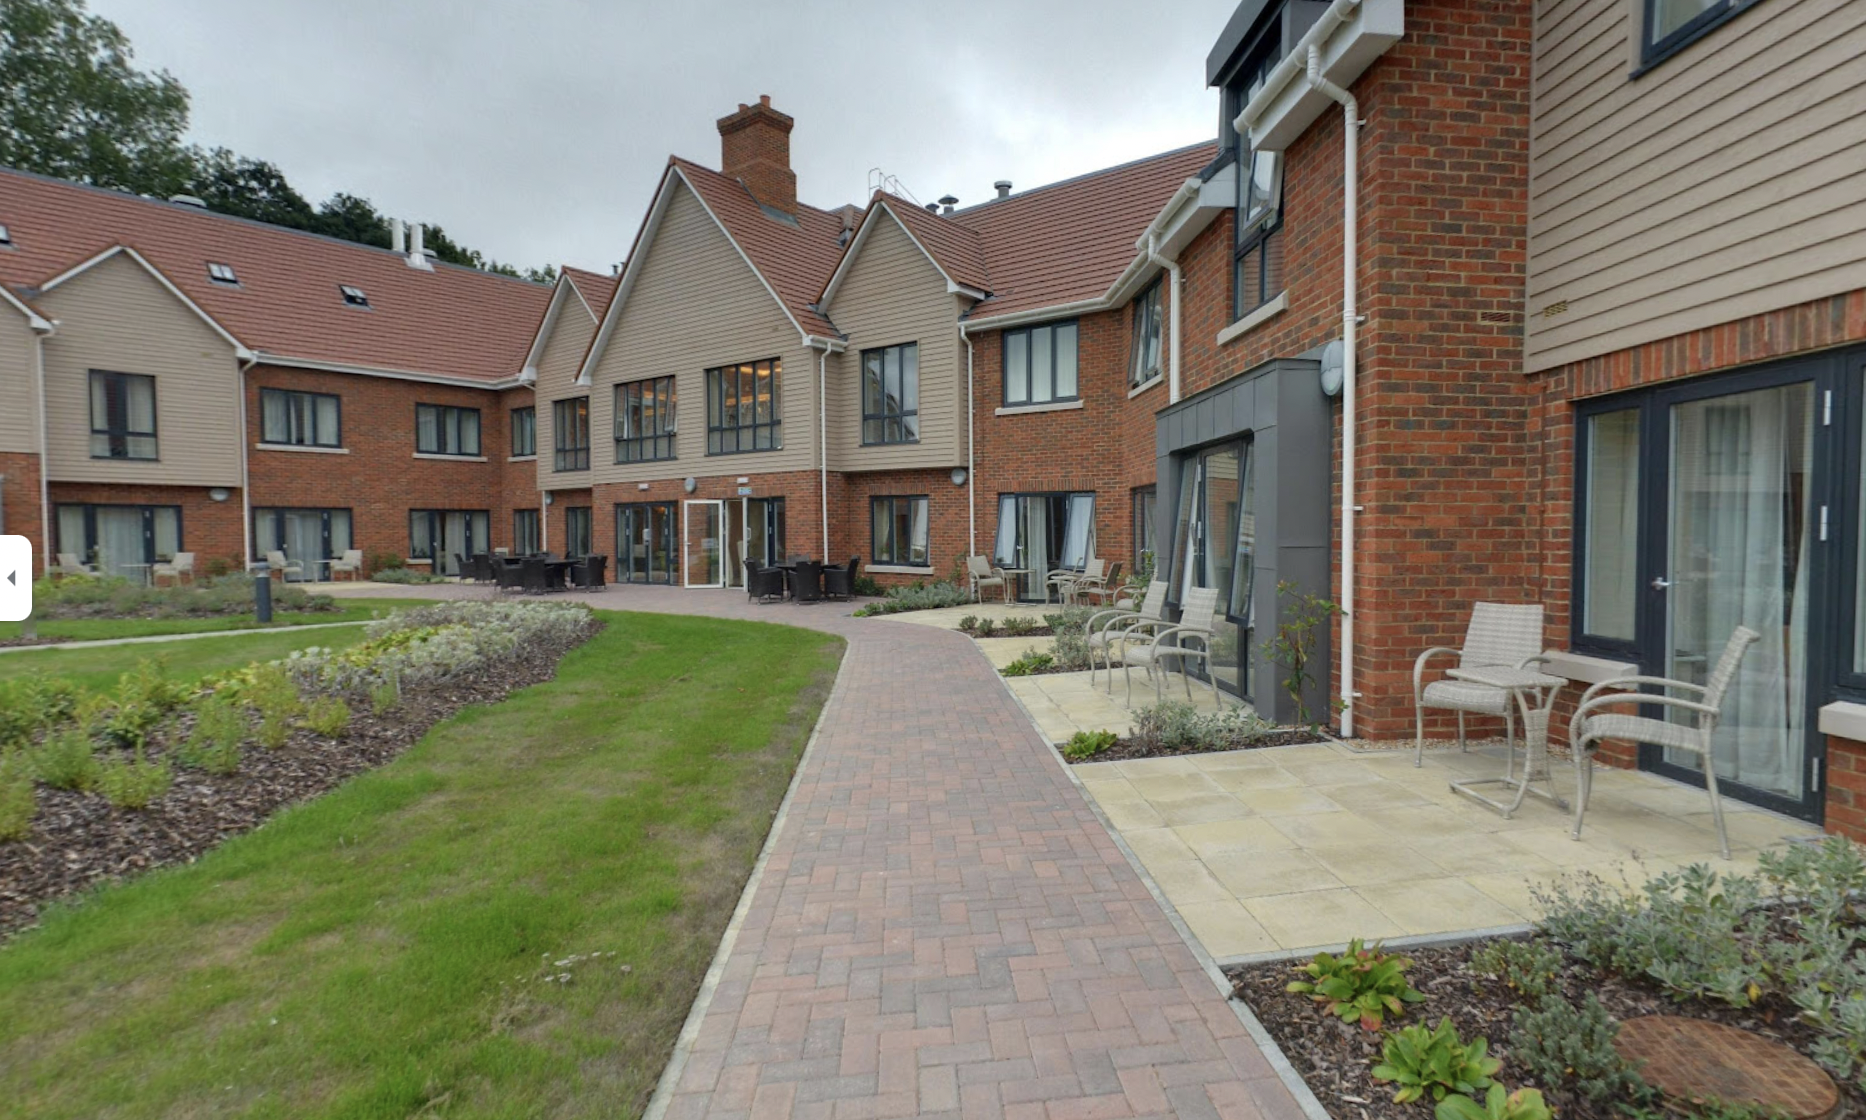 Exterior of The Goldbridge care home in Haywards Health, Sussex